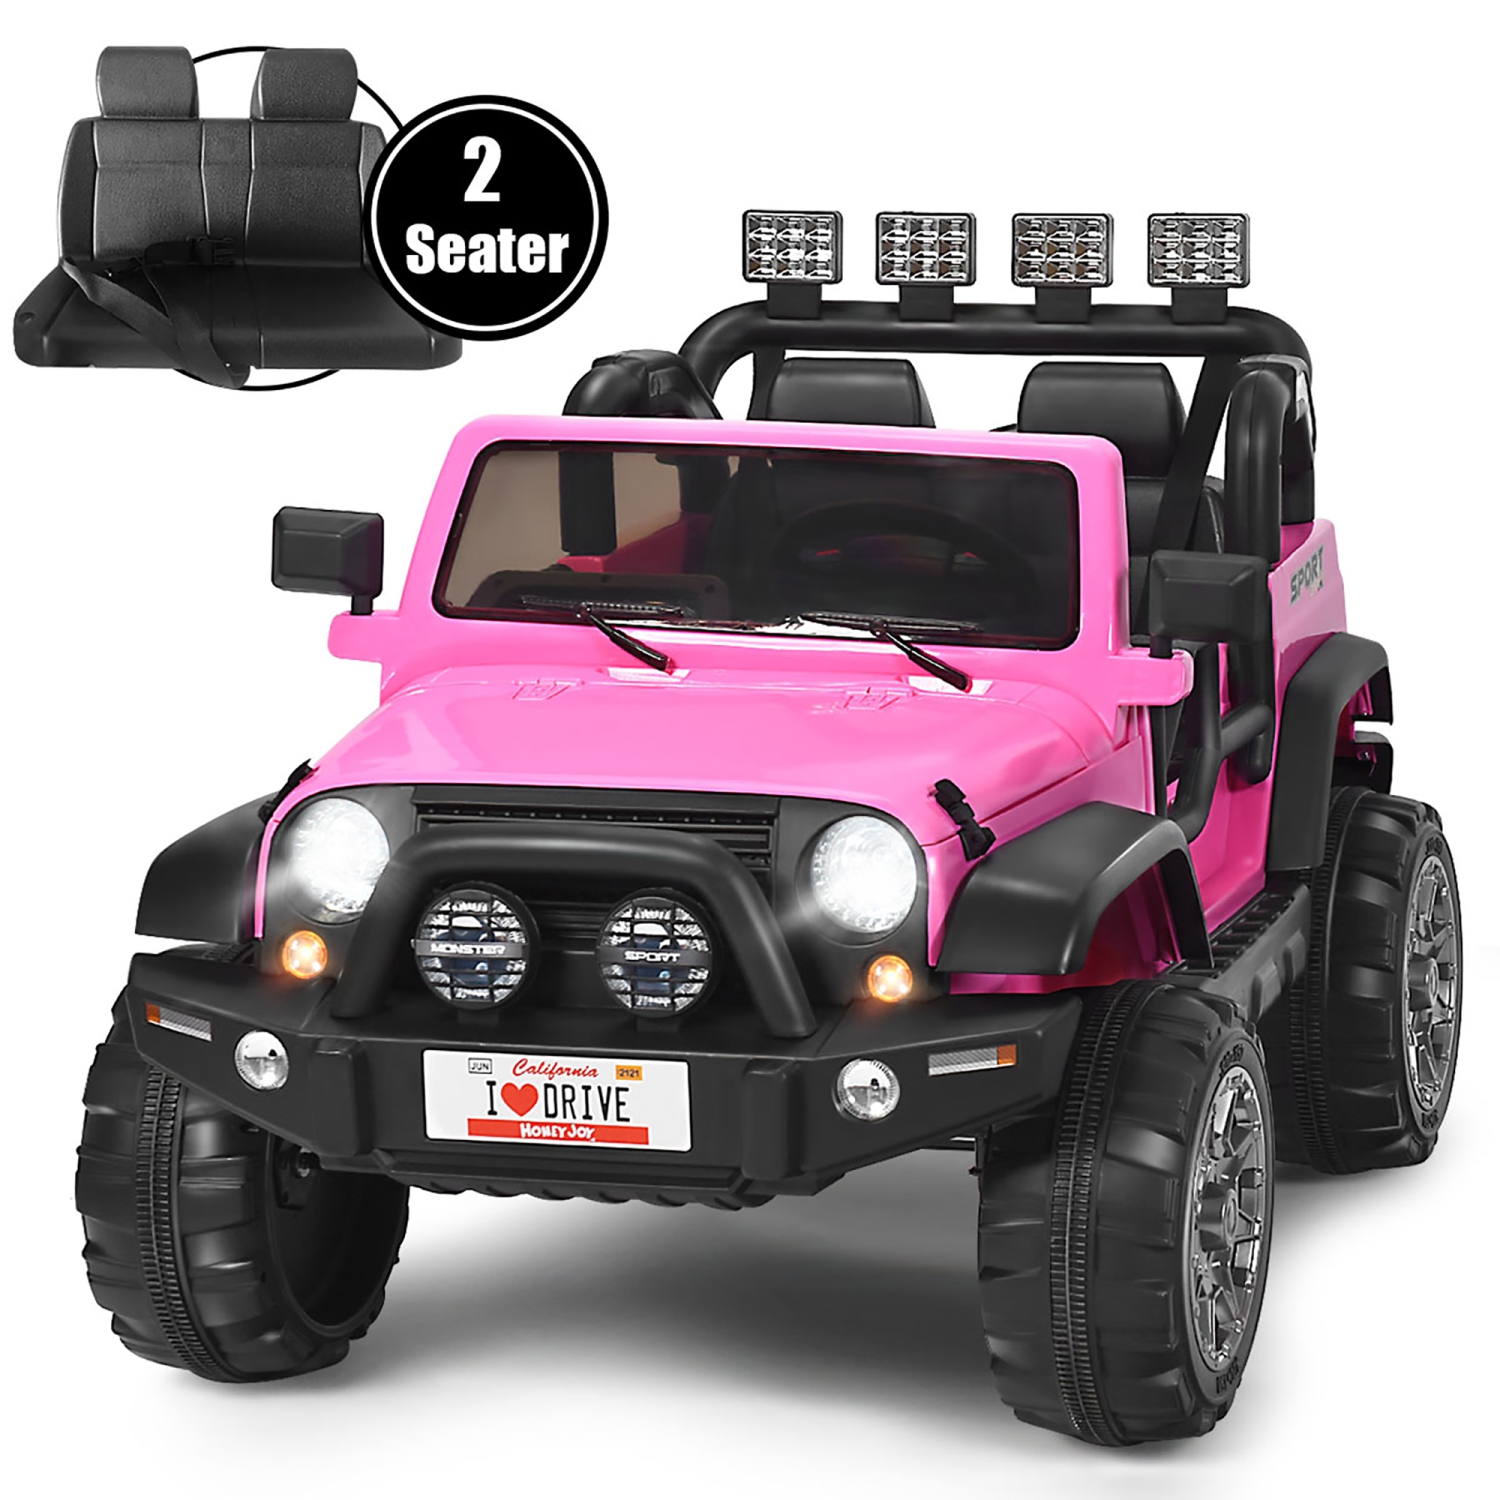 Costway 12V Kids Ride On Car 2 Seater Truck RC Electric Vehicles w/ Storage Room Pink